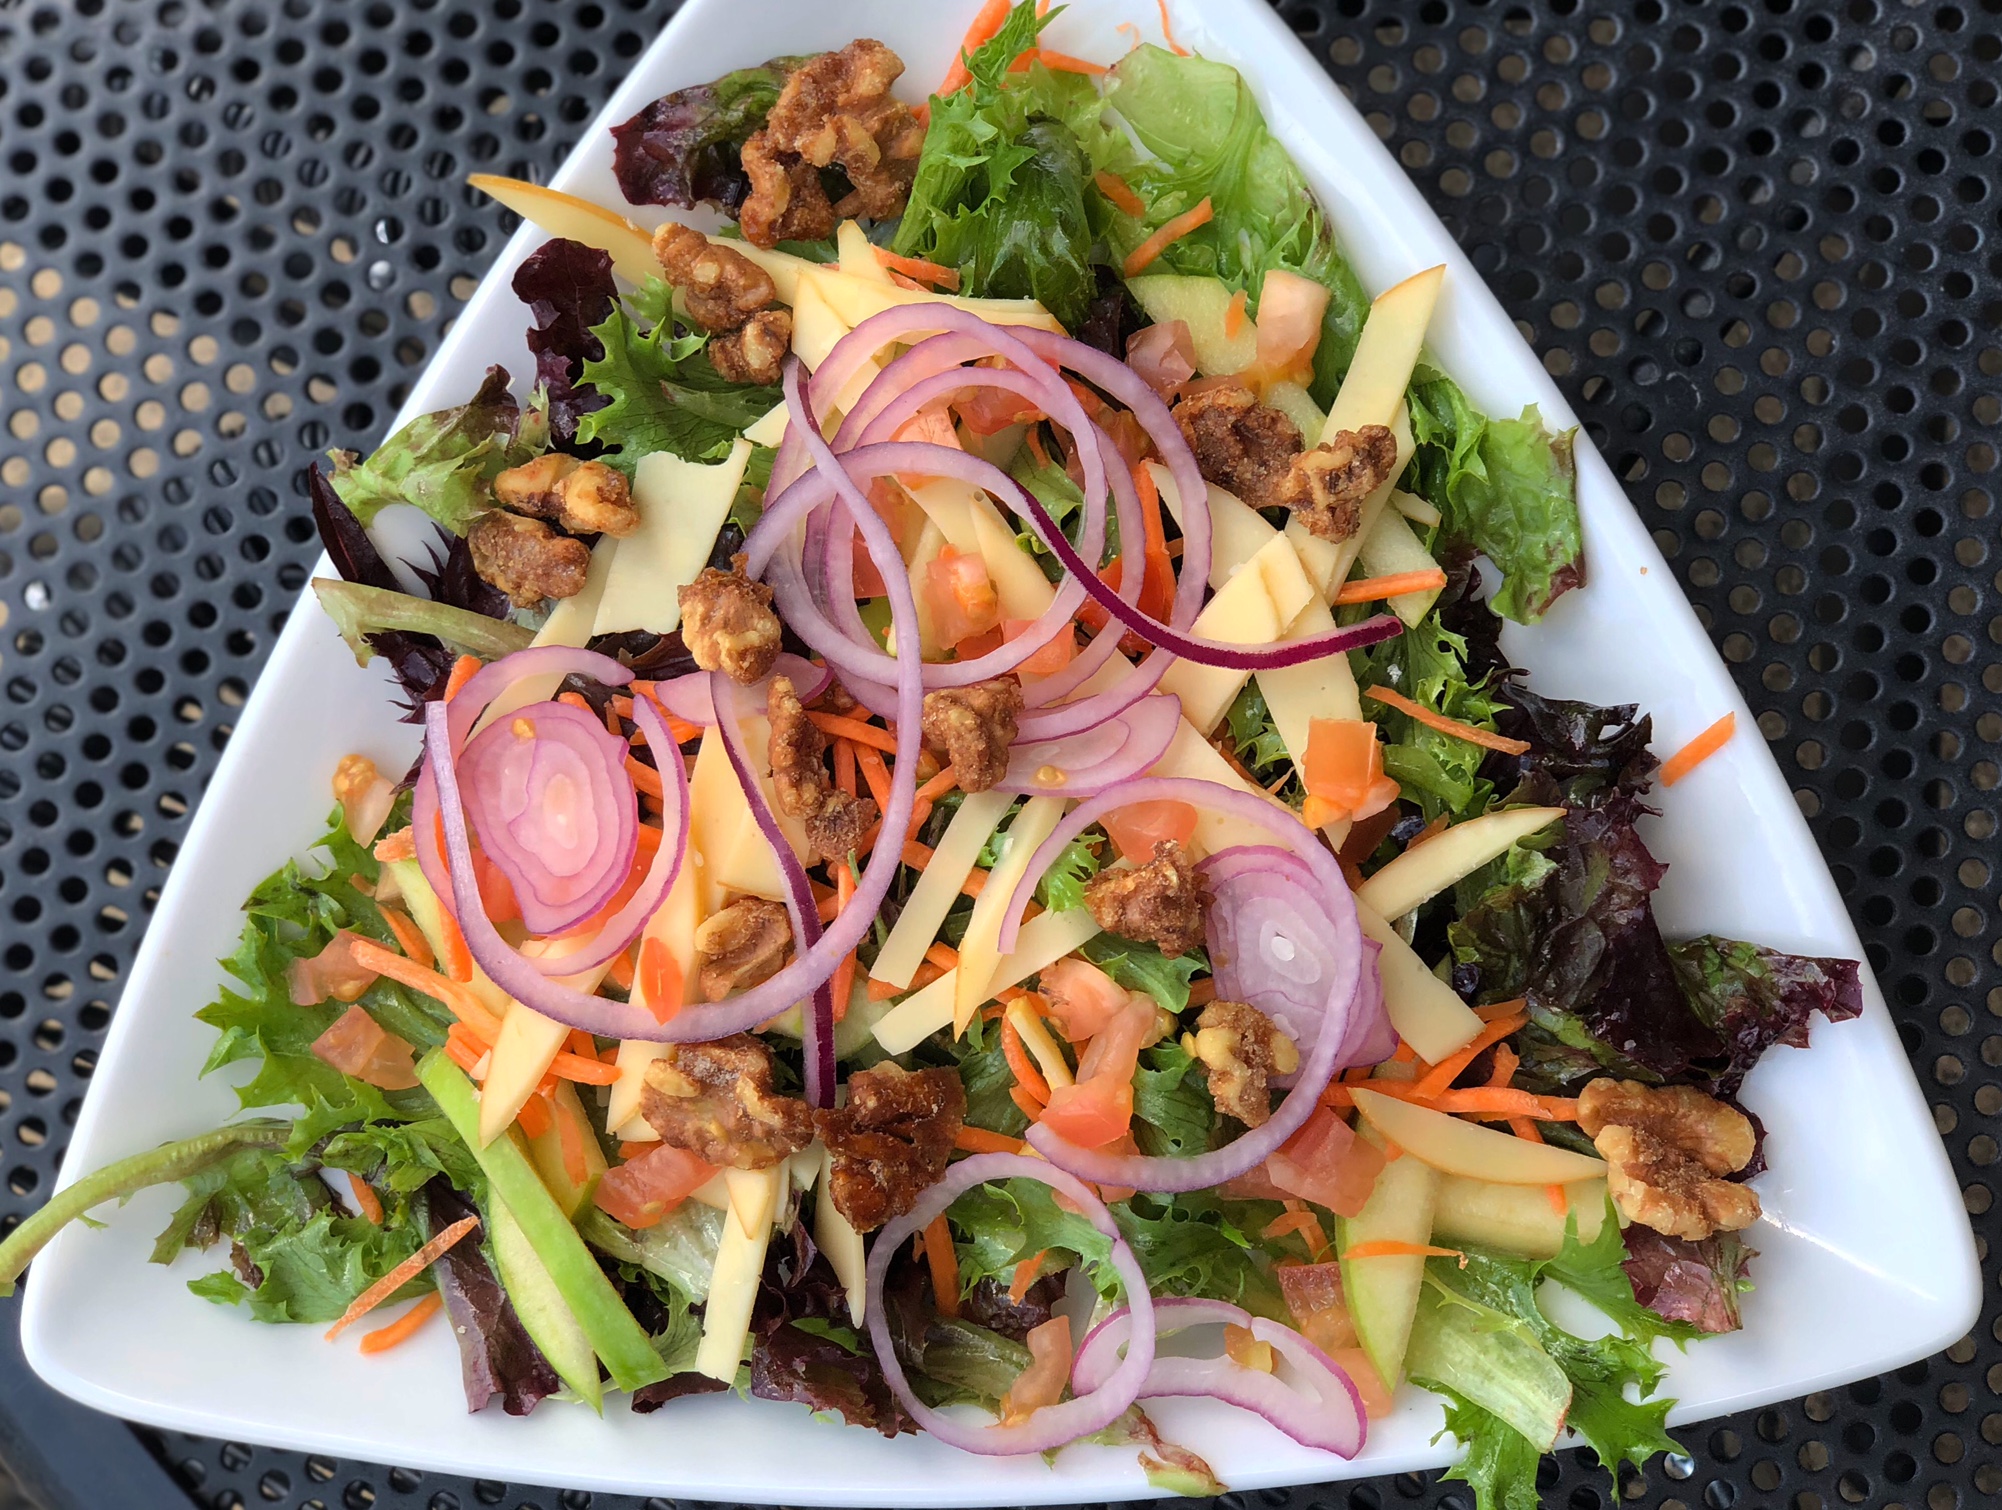 On a white triangular plate, there is a salad with lots of toppings. Photo by Alyssa Buckley.